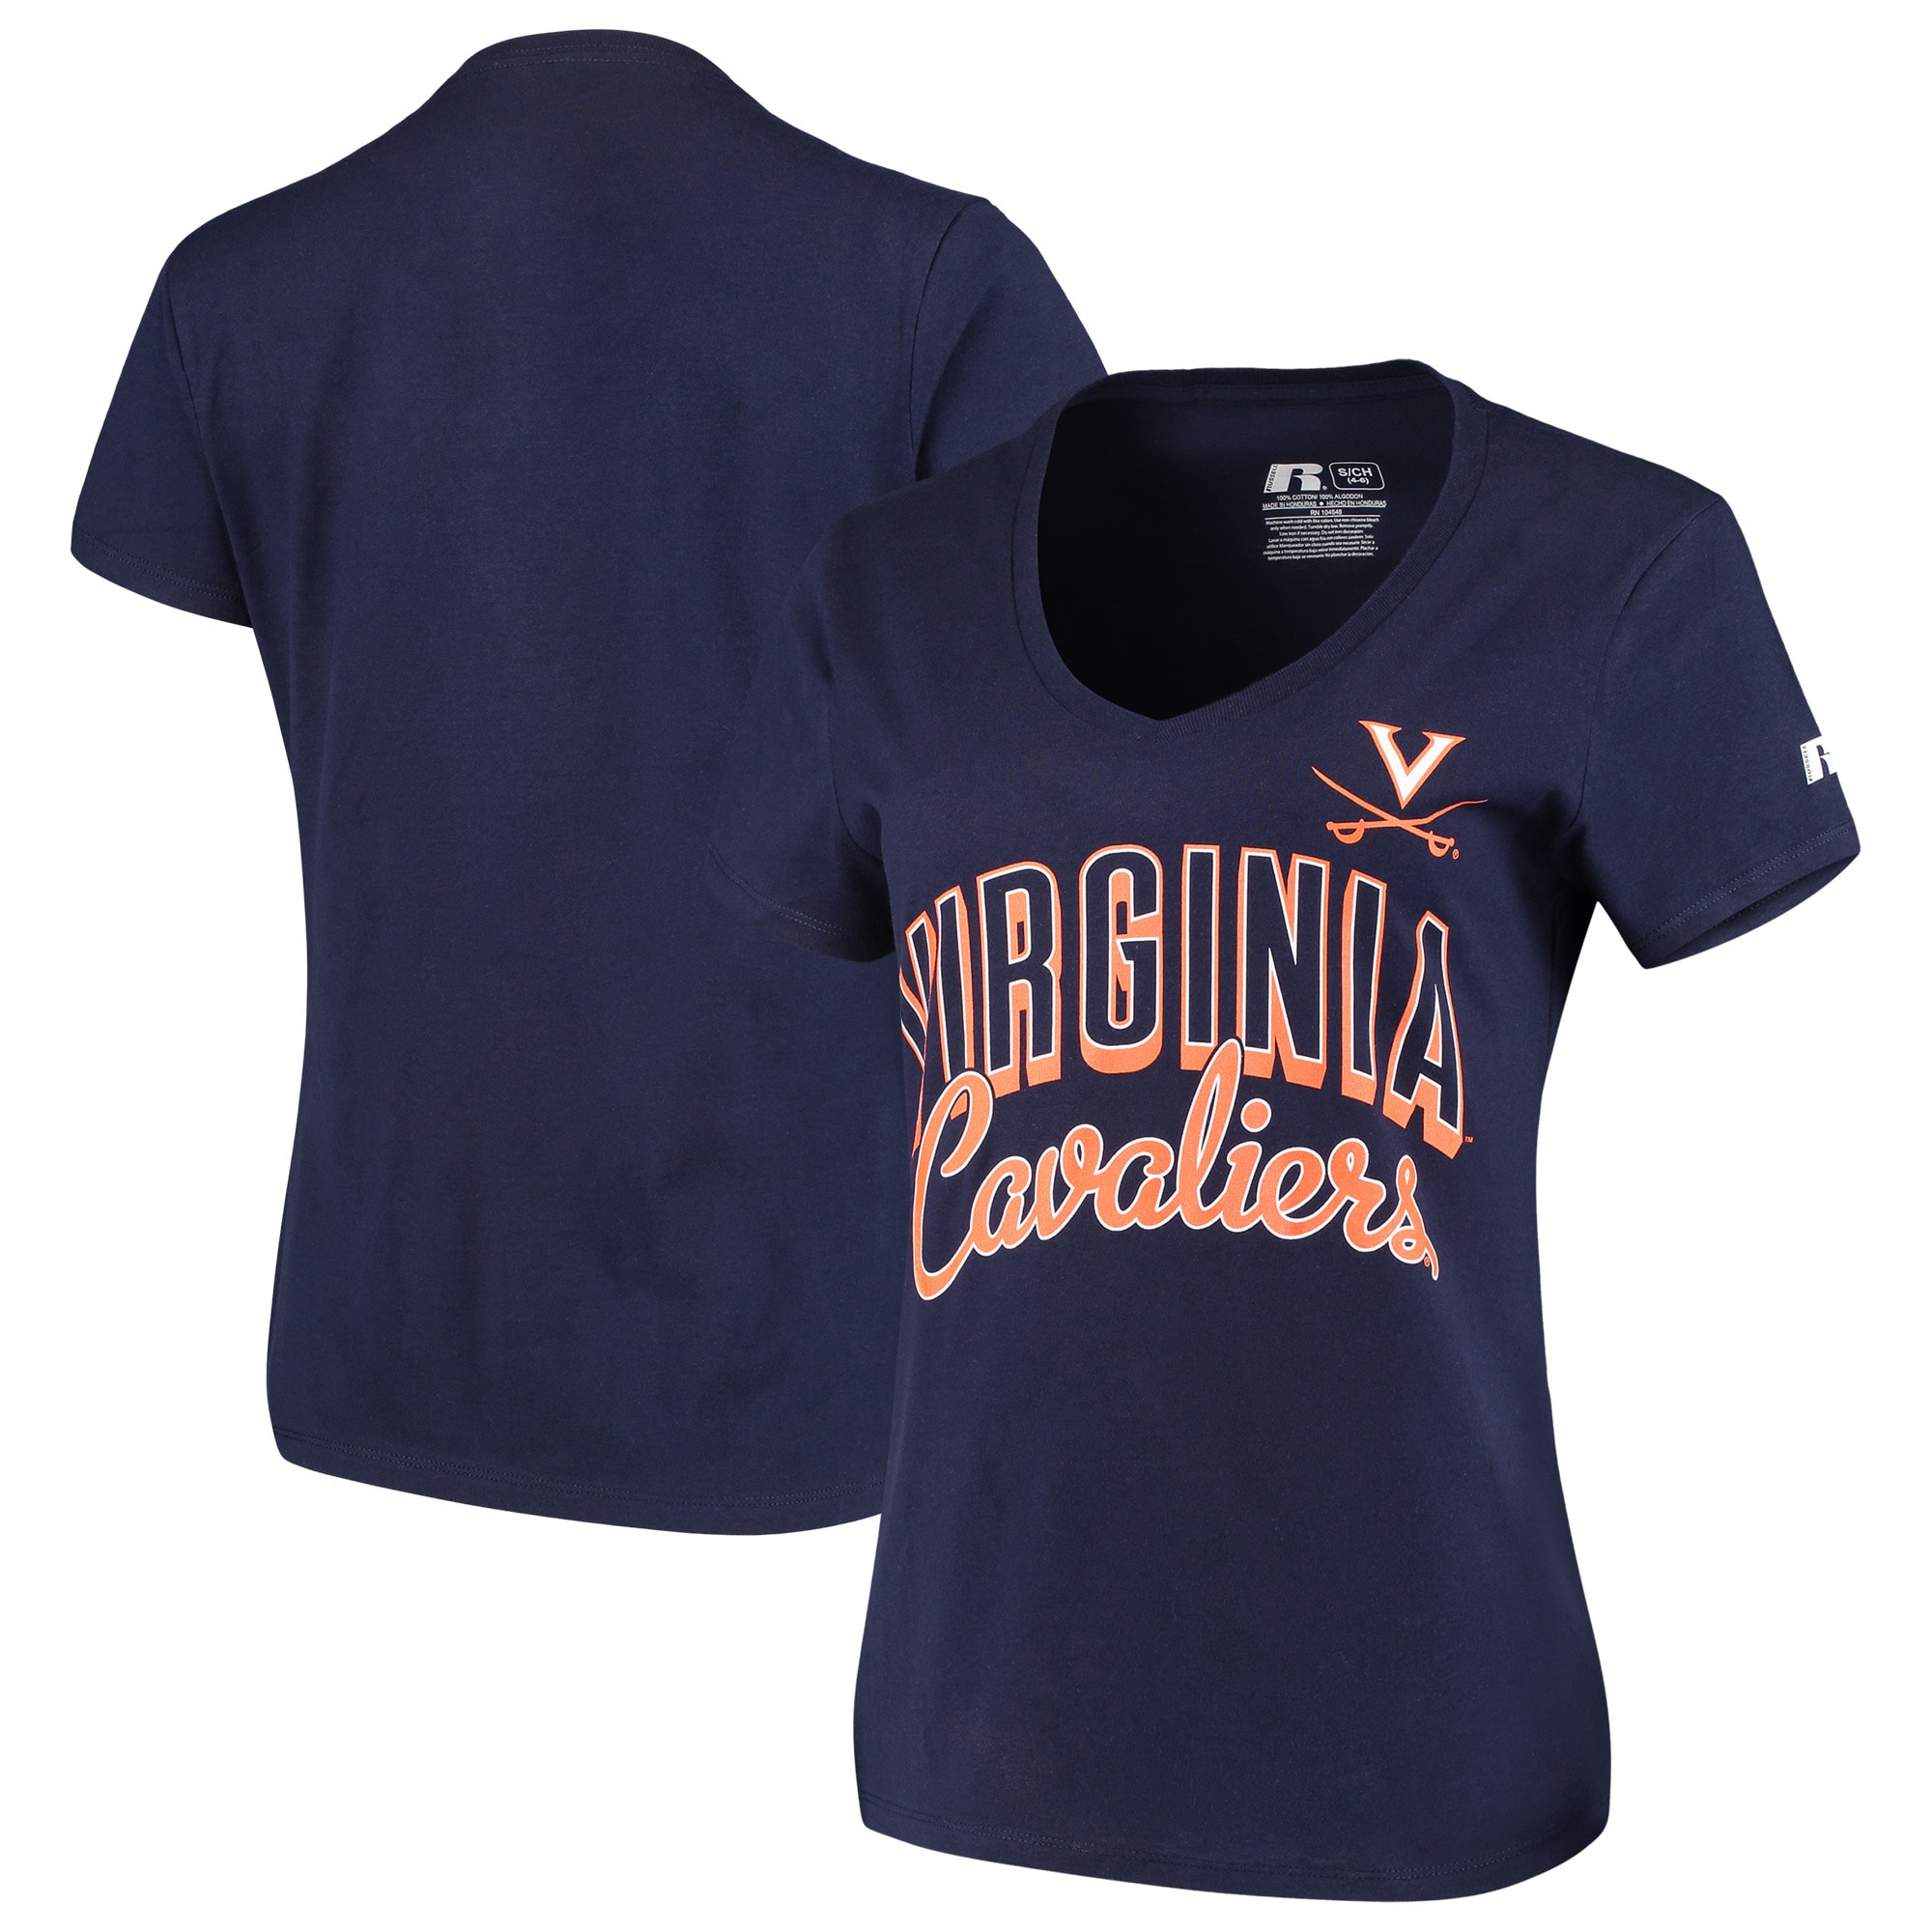 Virginia Cavaliers Russell Athletic Women's Arch V-Neck T-Shirt - Navy - image 1 of 3